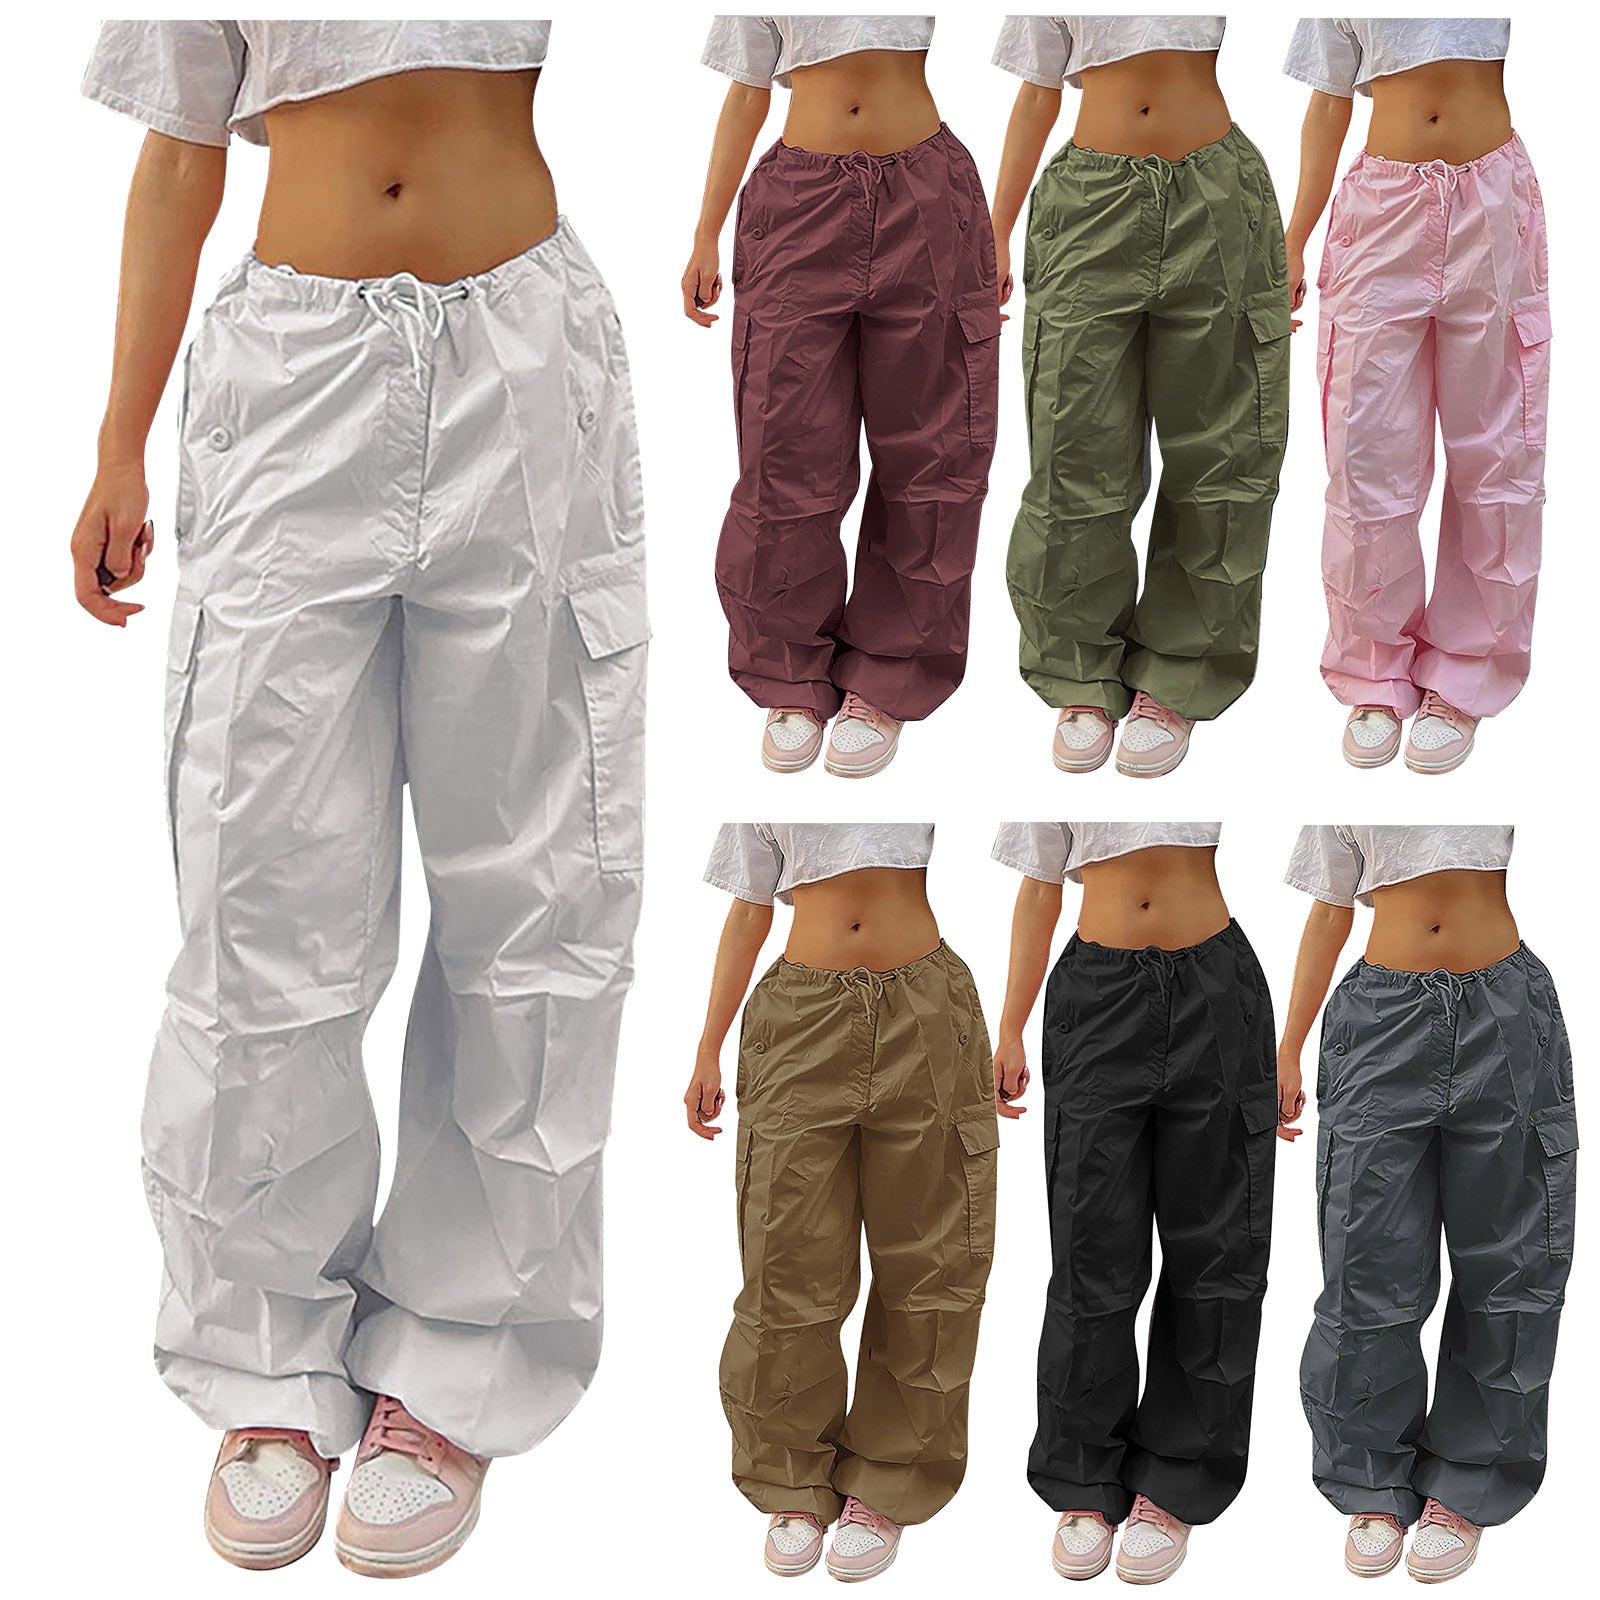 Lovemi -  Casual Cargo Pants For Women Solid Color Drawstring Pocket Design Fashion Street Trousers Girls